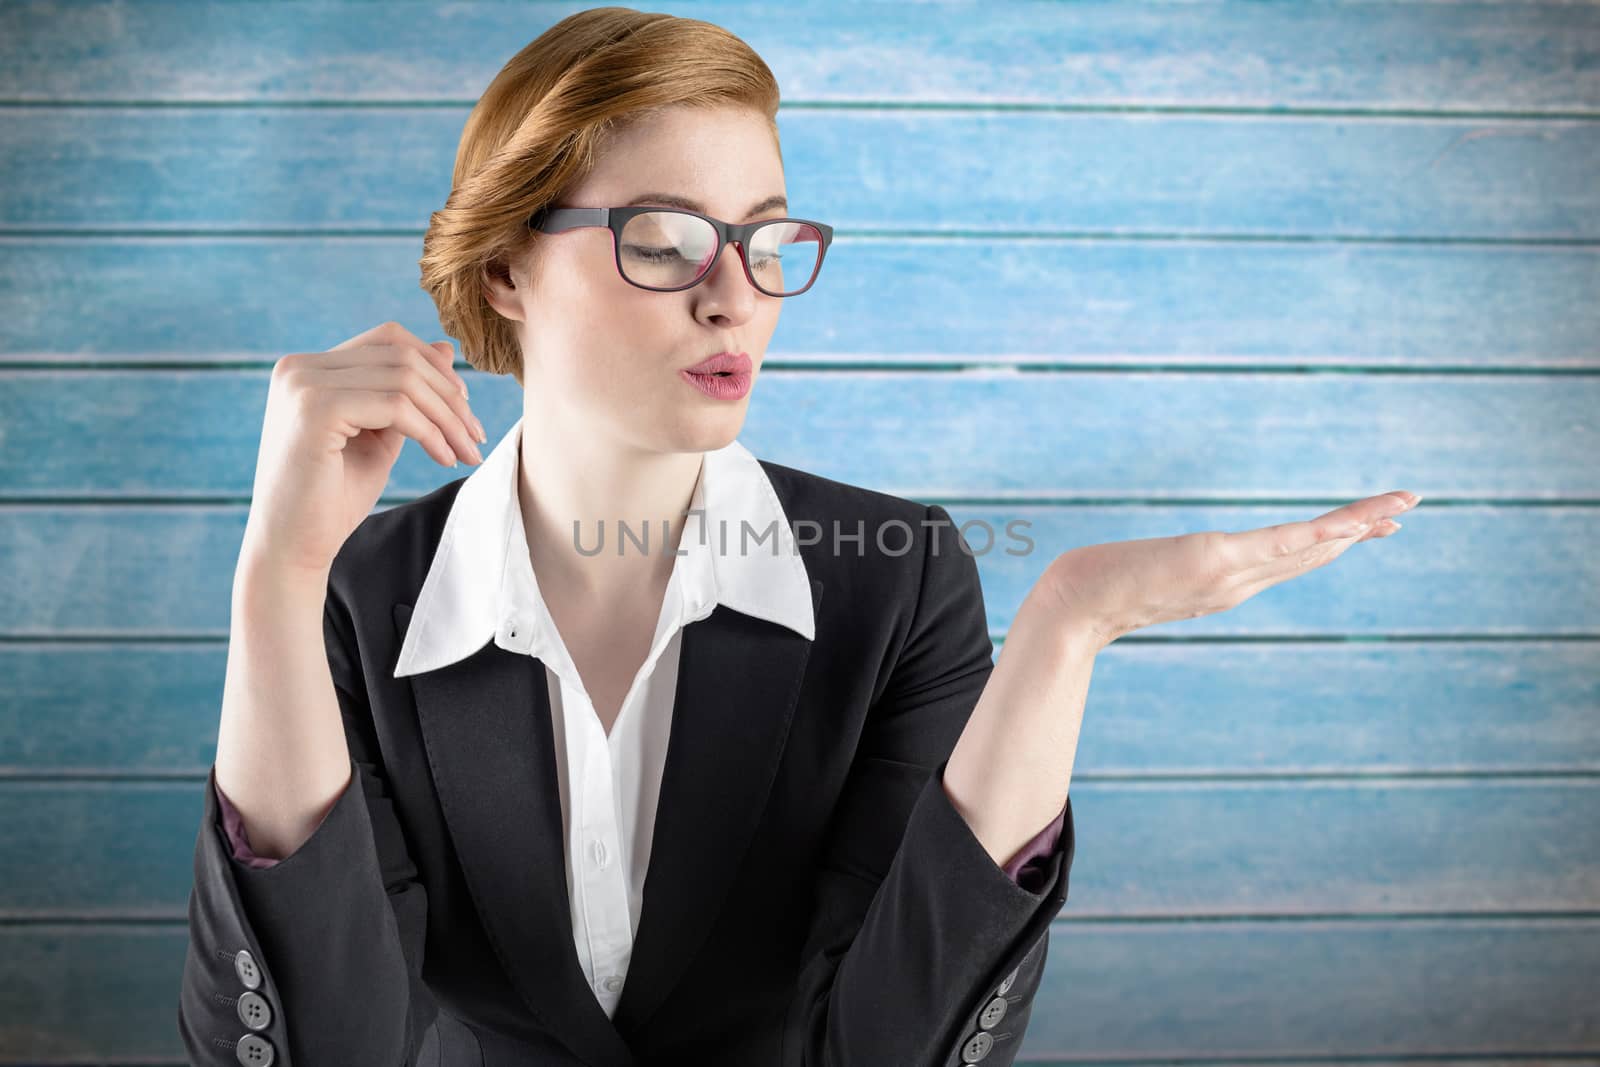 Businesswoman holding hand out in presentation against wooden planks